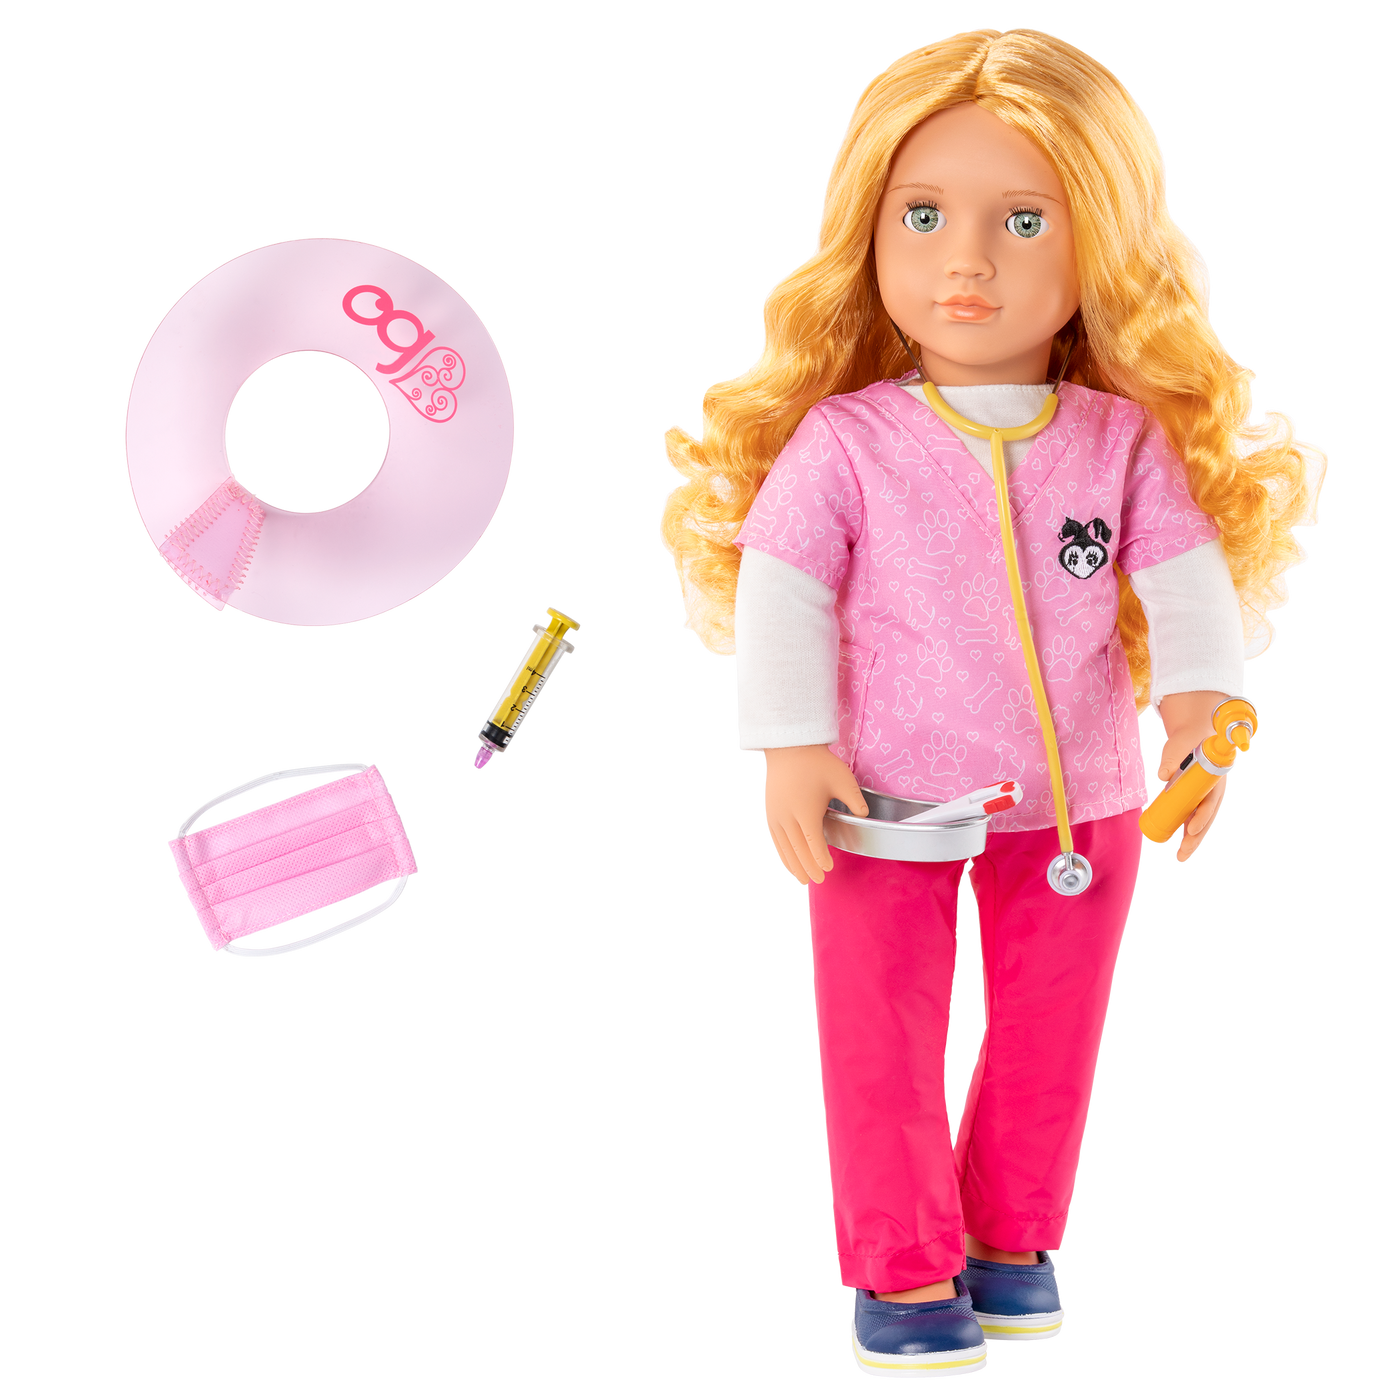 18-inch veterinarian doll with strawberry-blonde hair, green eyes and vet accessories